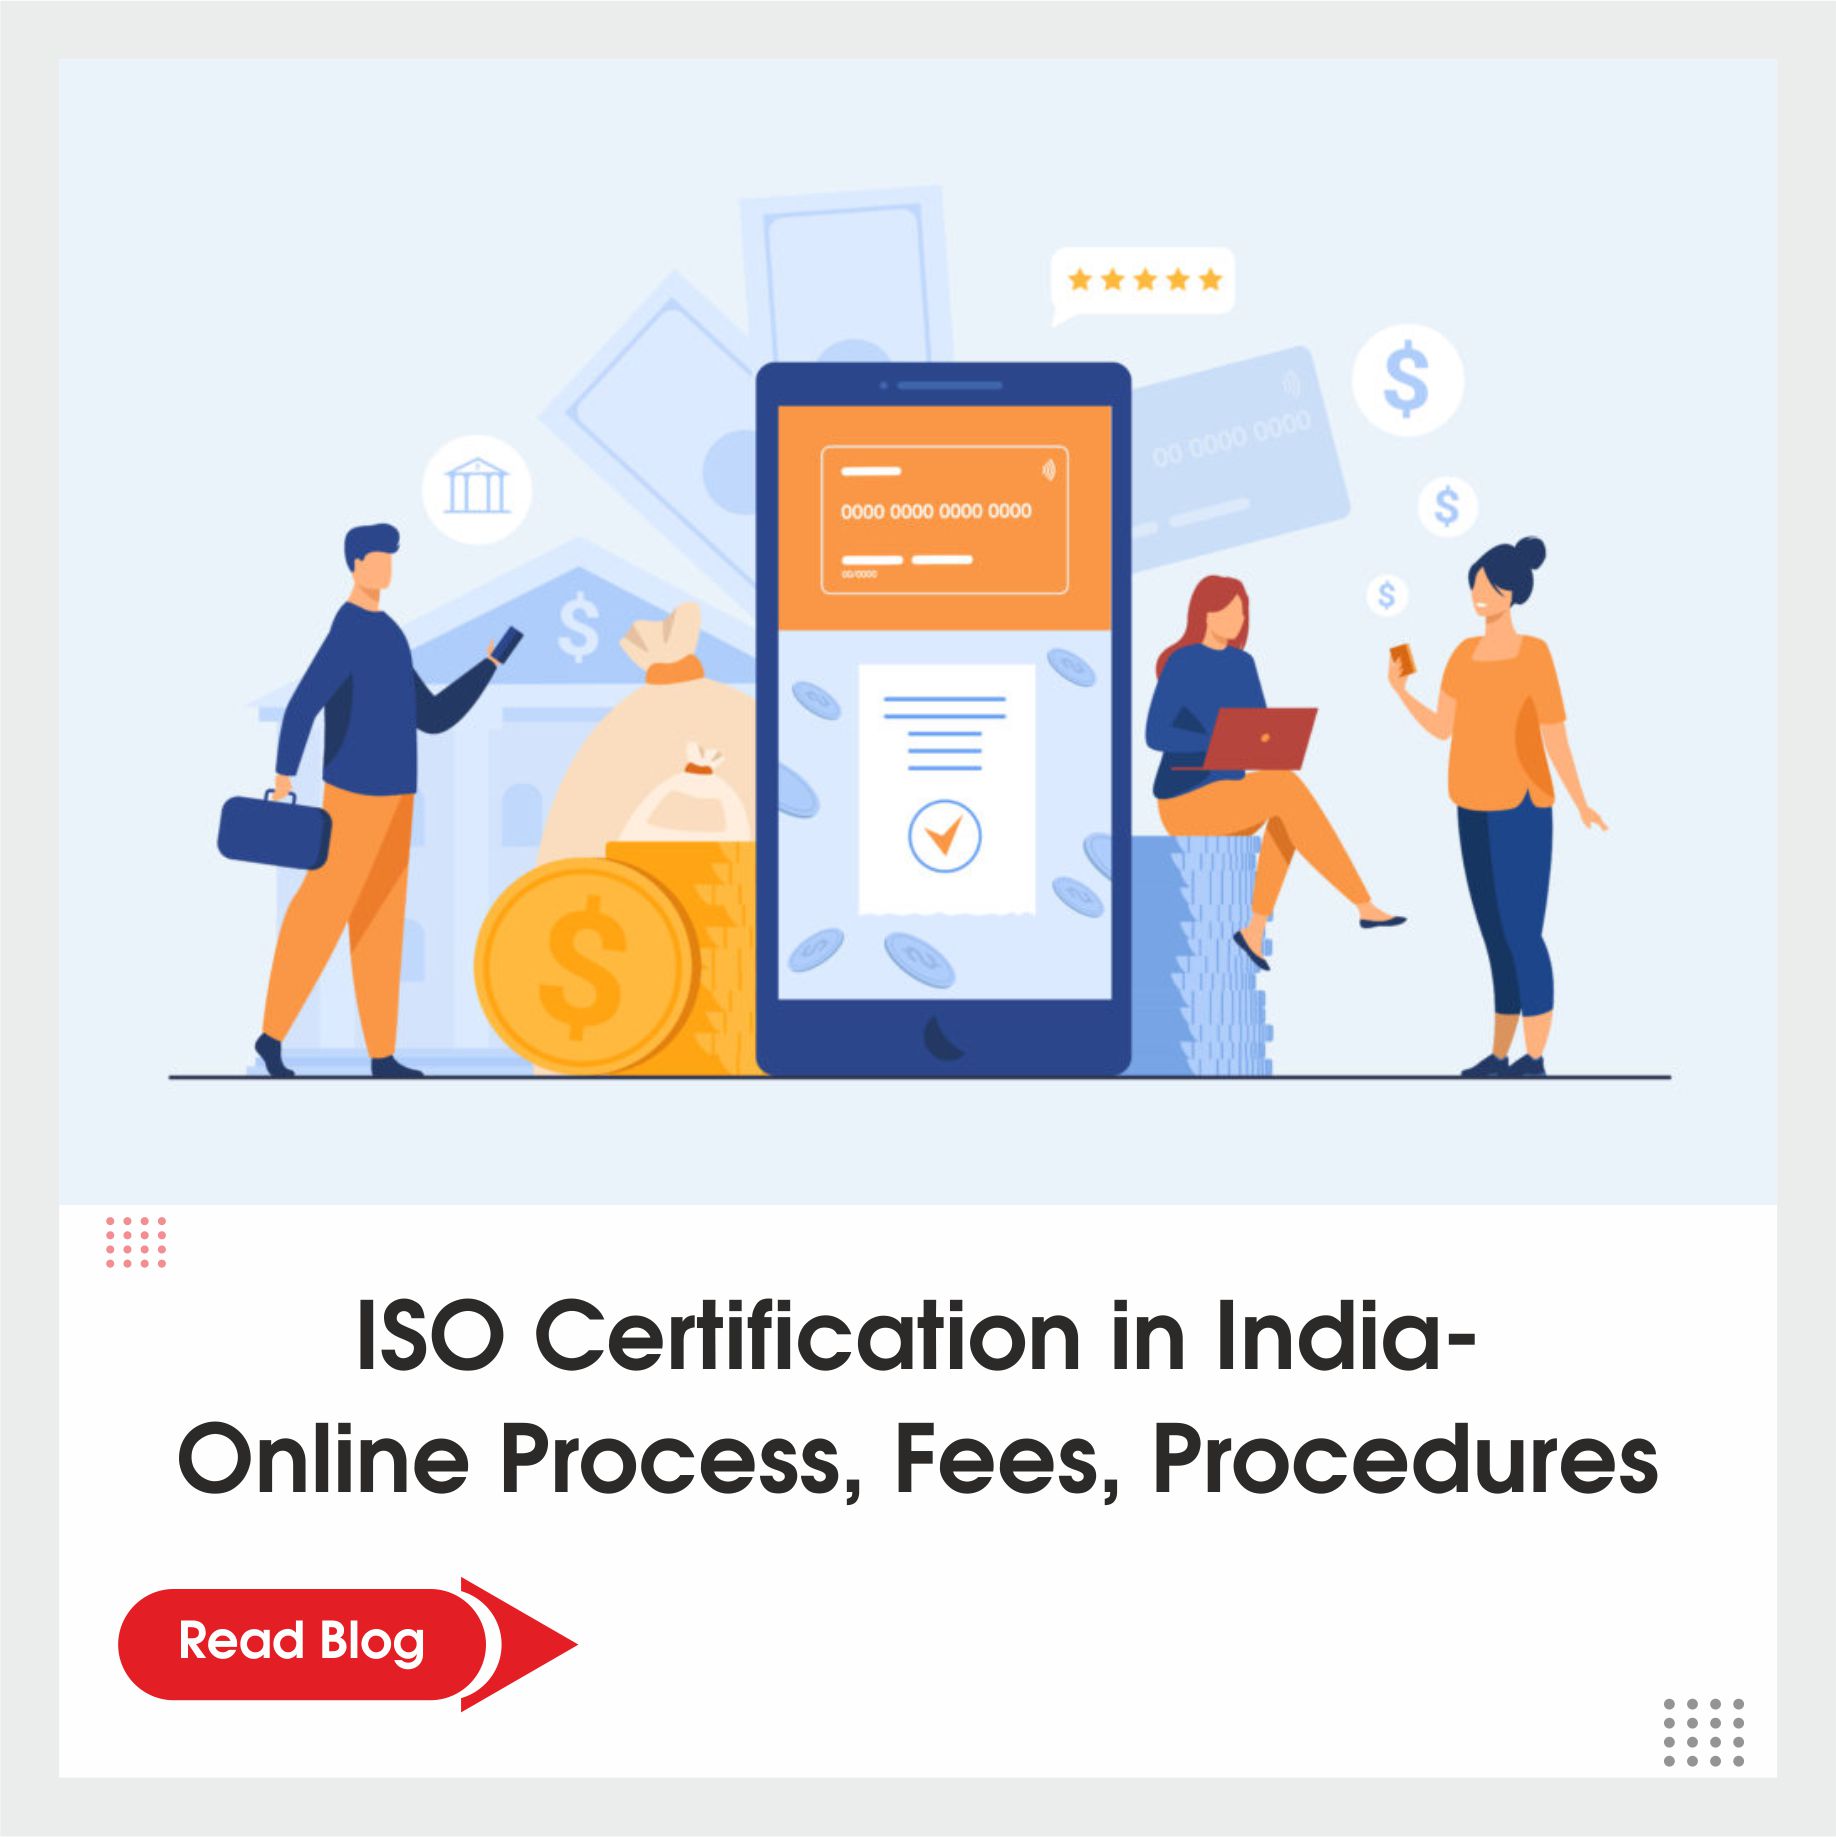 ISO-Certification-in-India-Online-Process-Fees-Procedures